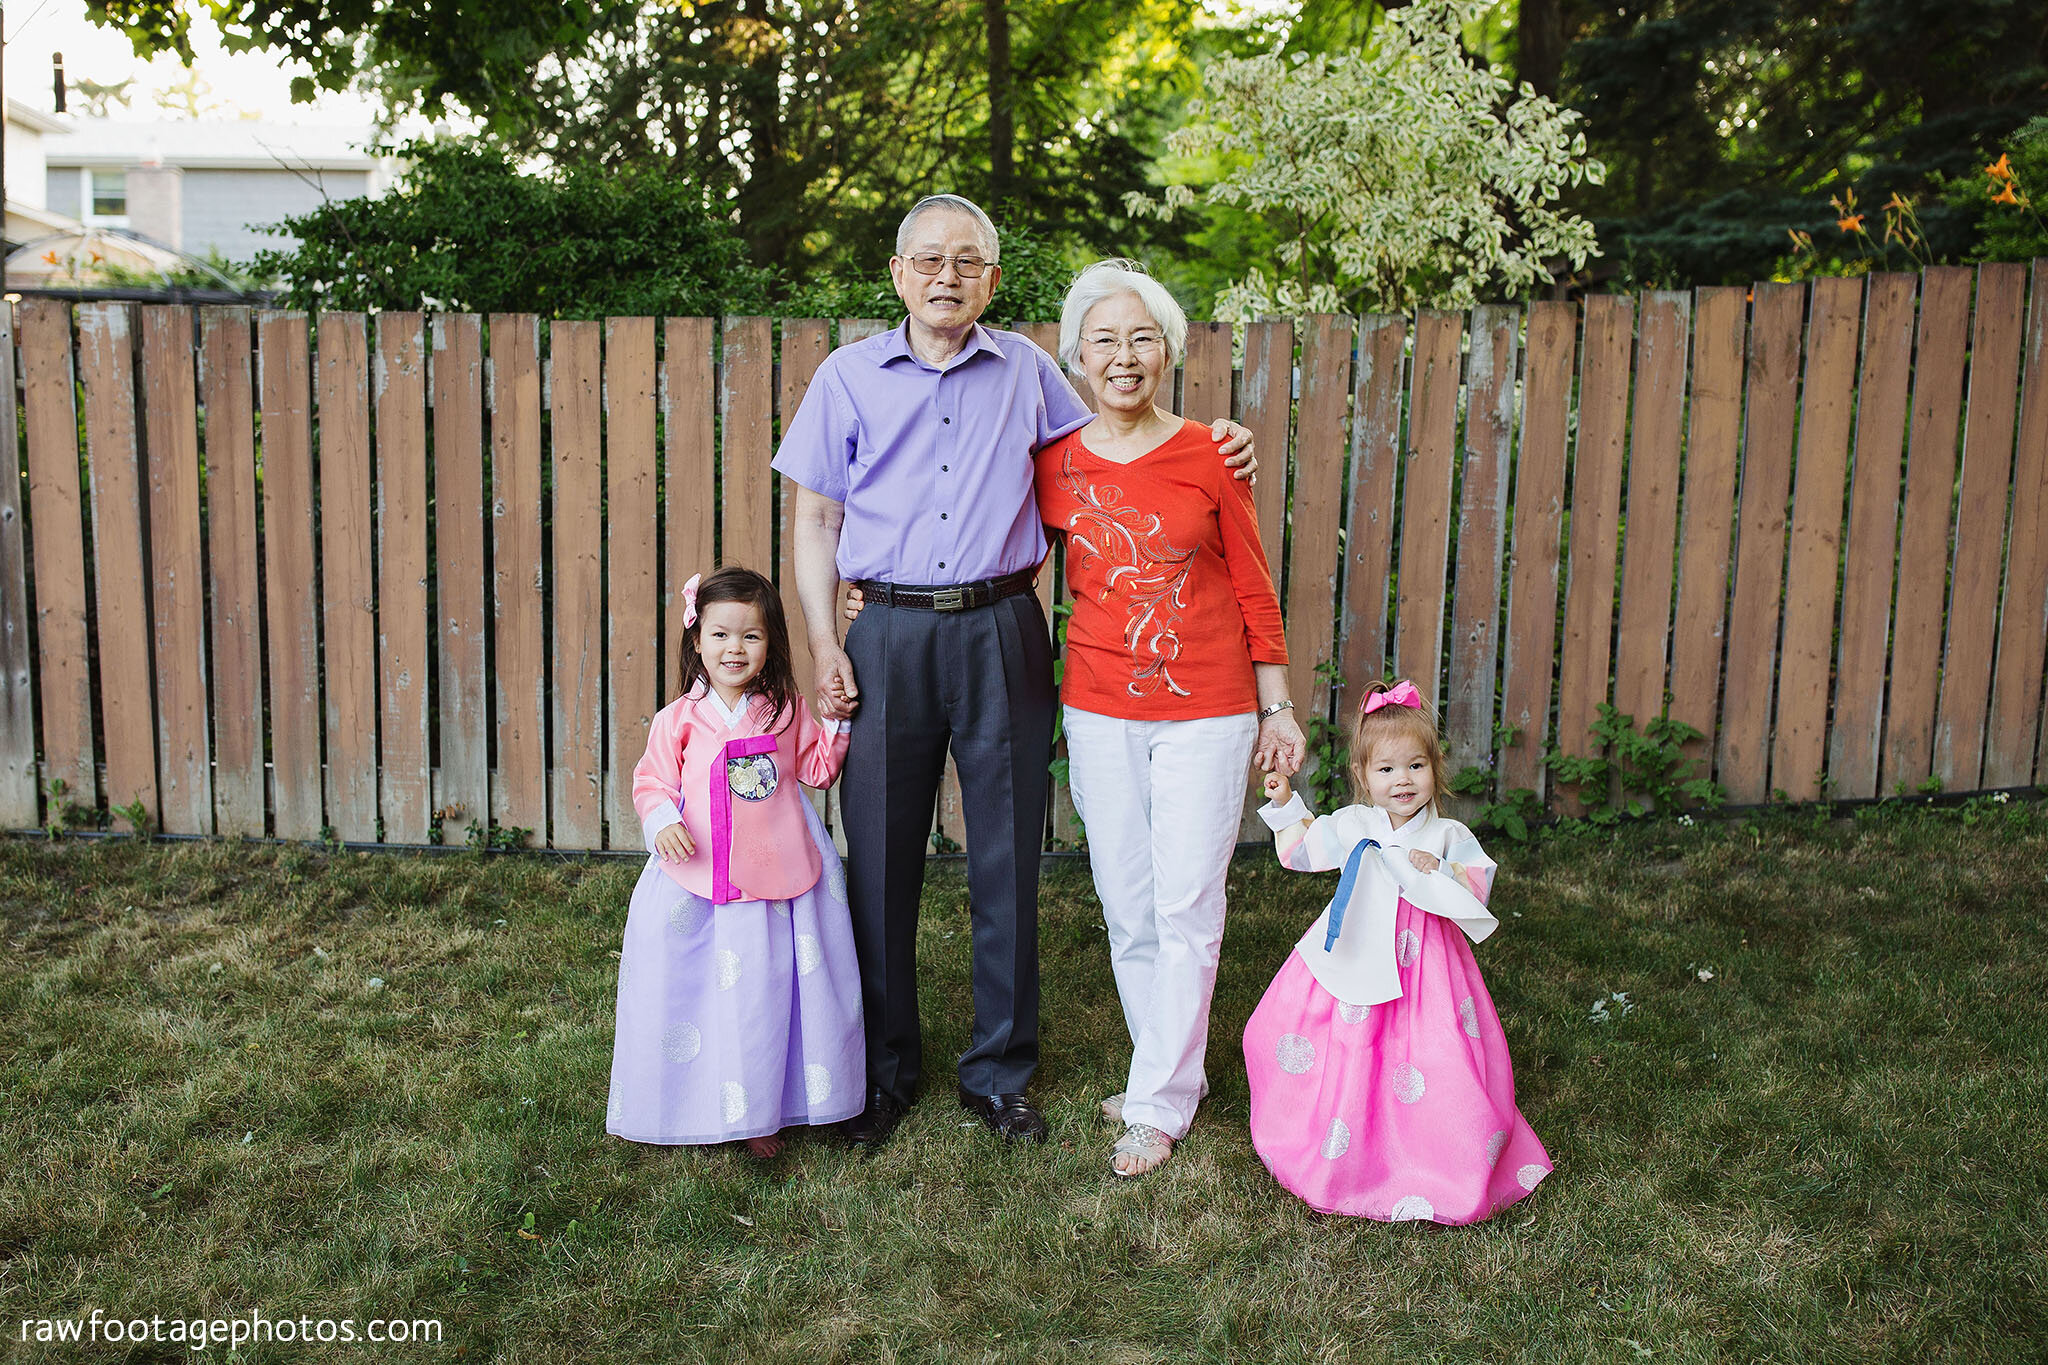 london_ontario_family_photographer-extended_family_session-grandparents-cousins-backyard_session-civic_gardens-raw_footage_photography-018.jpg